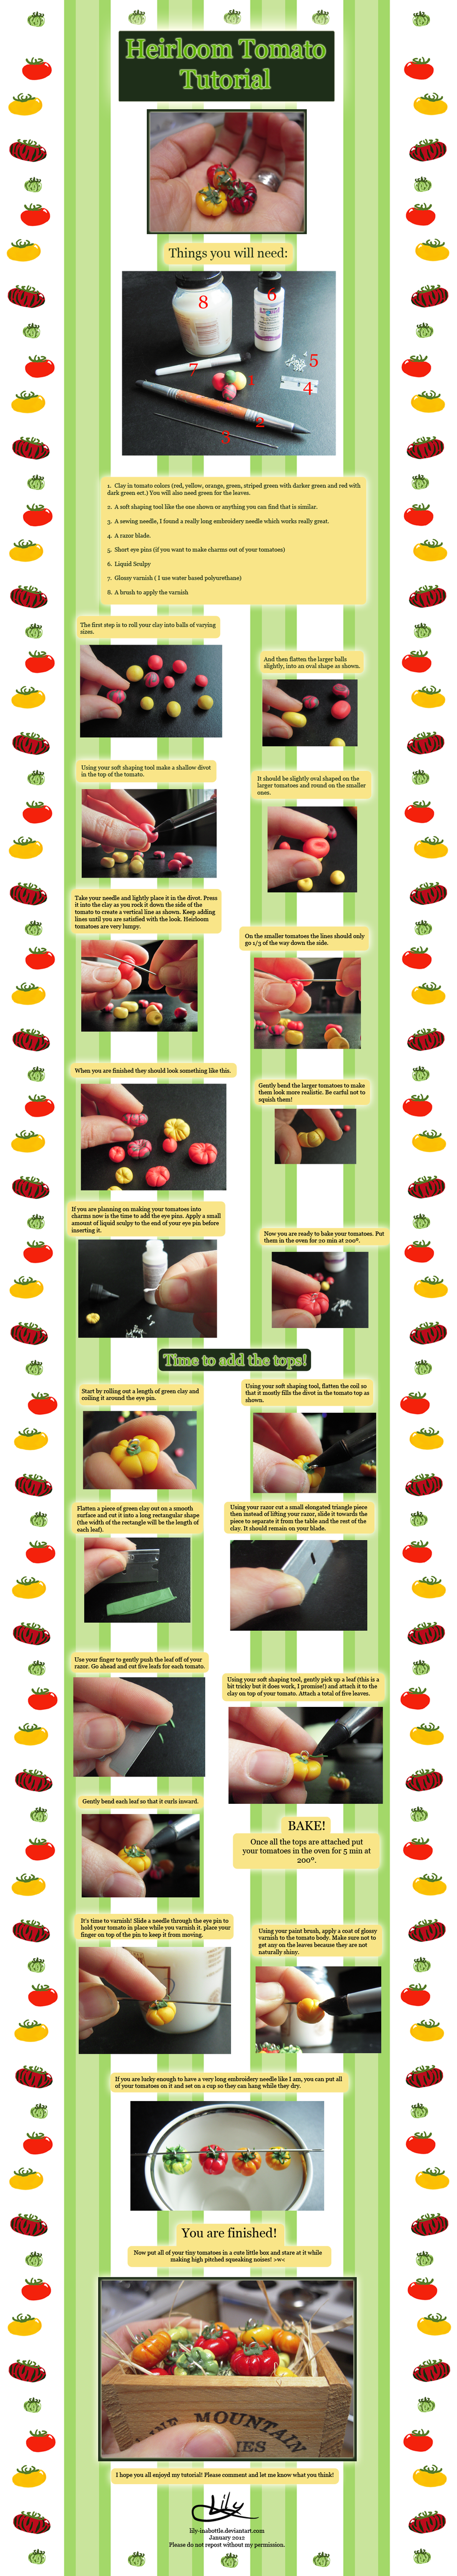 http://fc02.deviantart.net/fs70/i/2012/082/e/d/heirloom_tomato_tutorial_by_lily_inabottle-d4tqilf.png